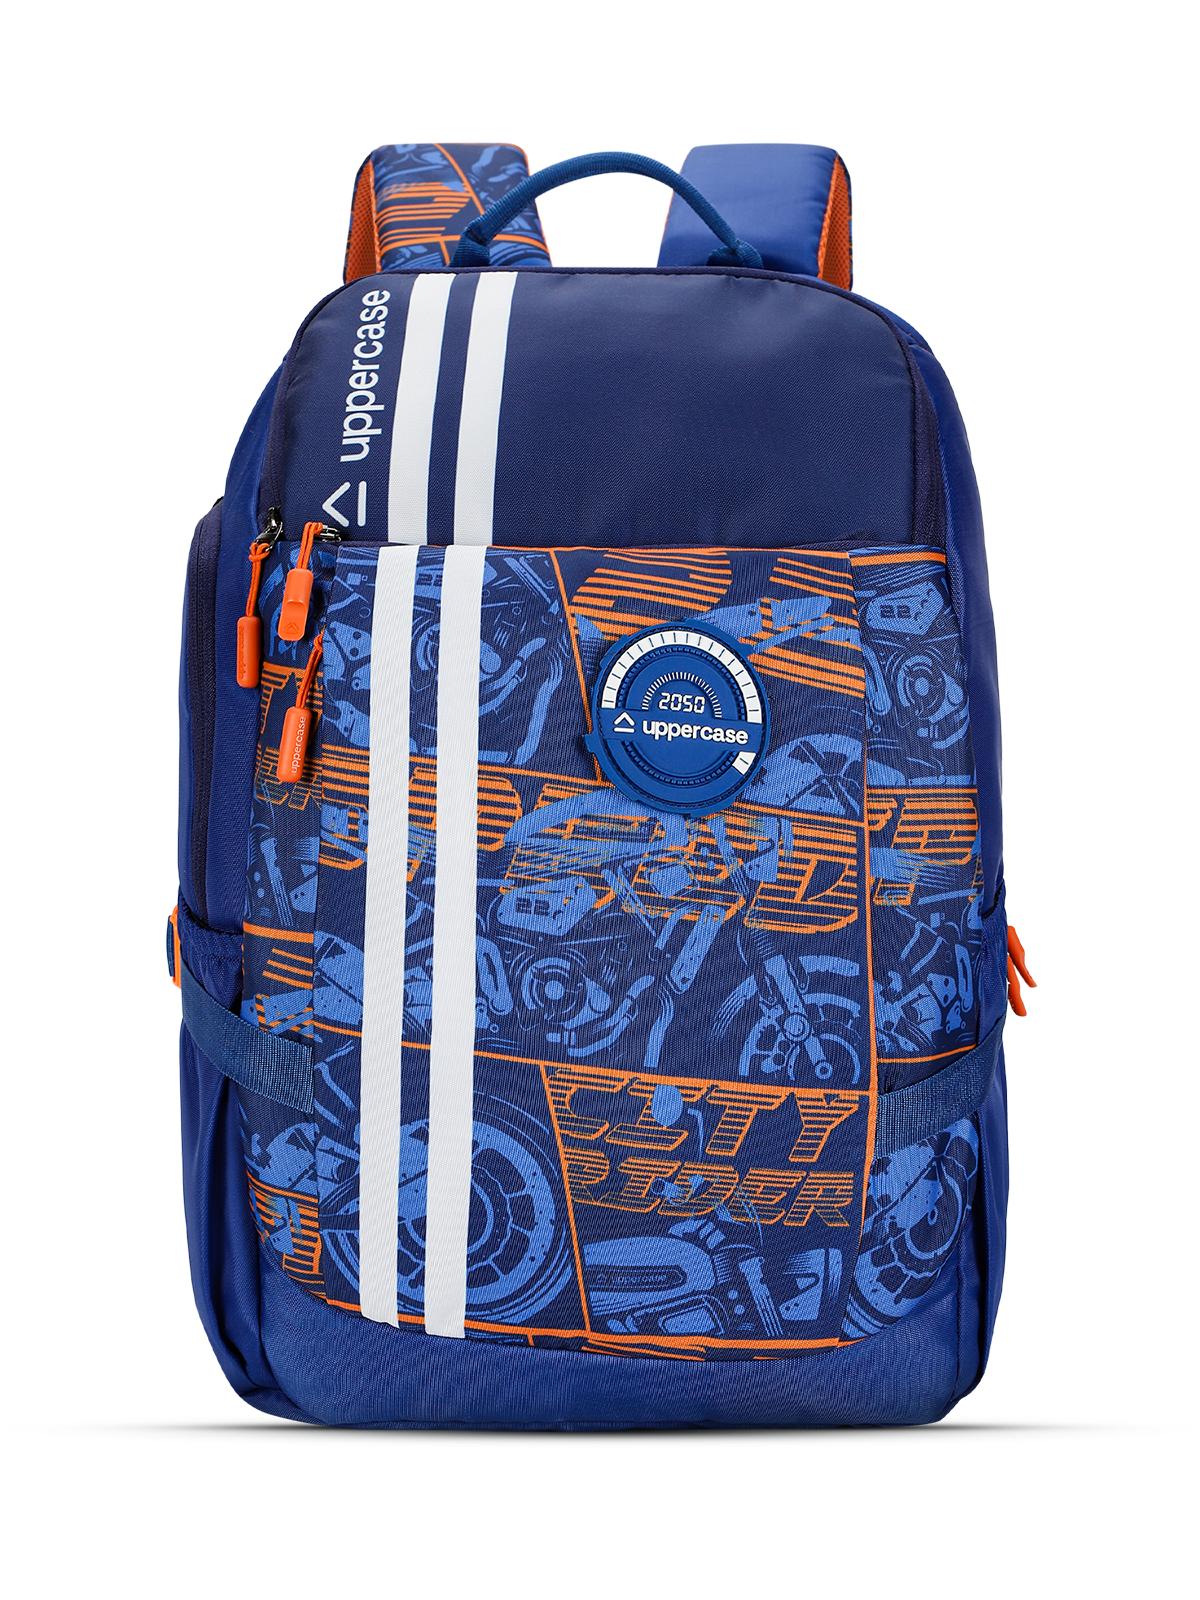 uppercase Campus 01 Backpack Double Compartment School Bag 33L Blue